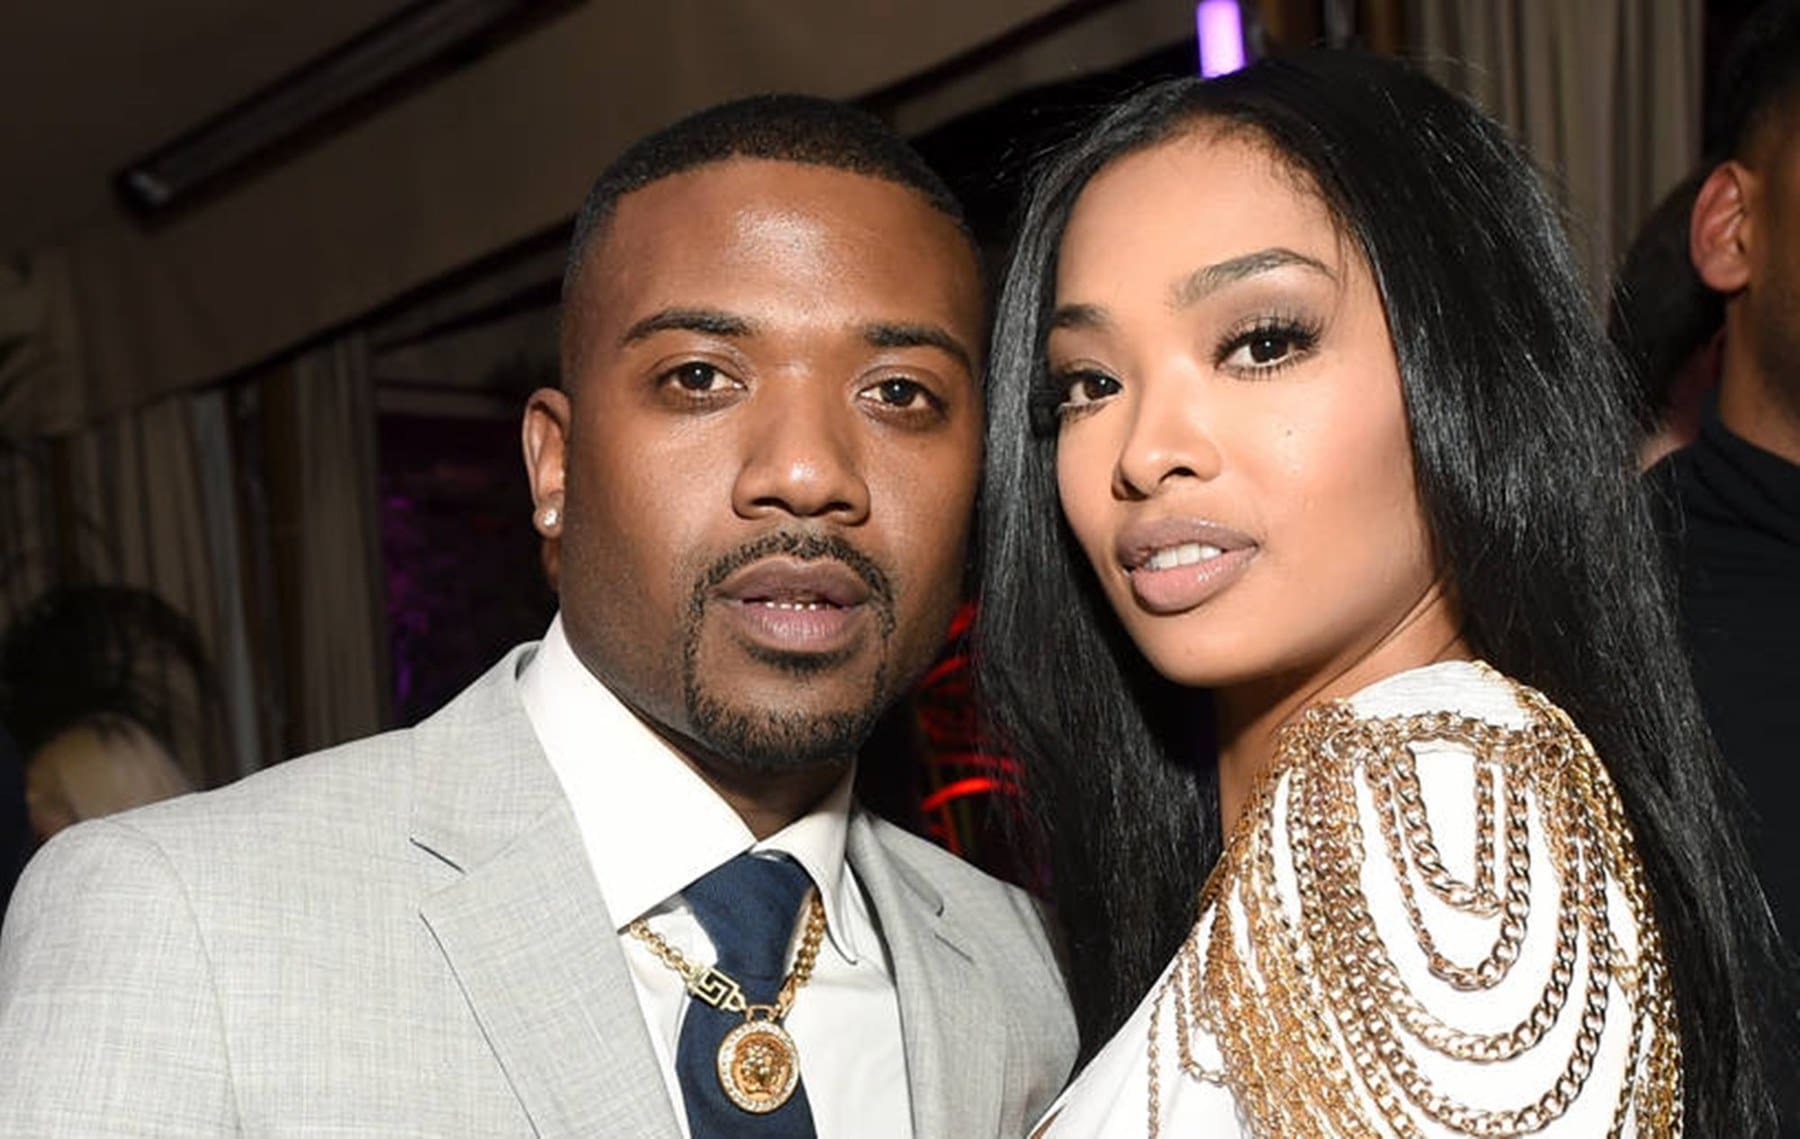 Ray J And Princess Love Are About To Spill Their Relationship Tea On A New Program - See The Video